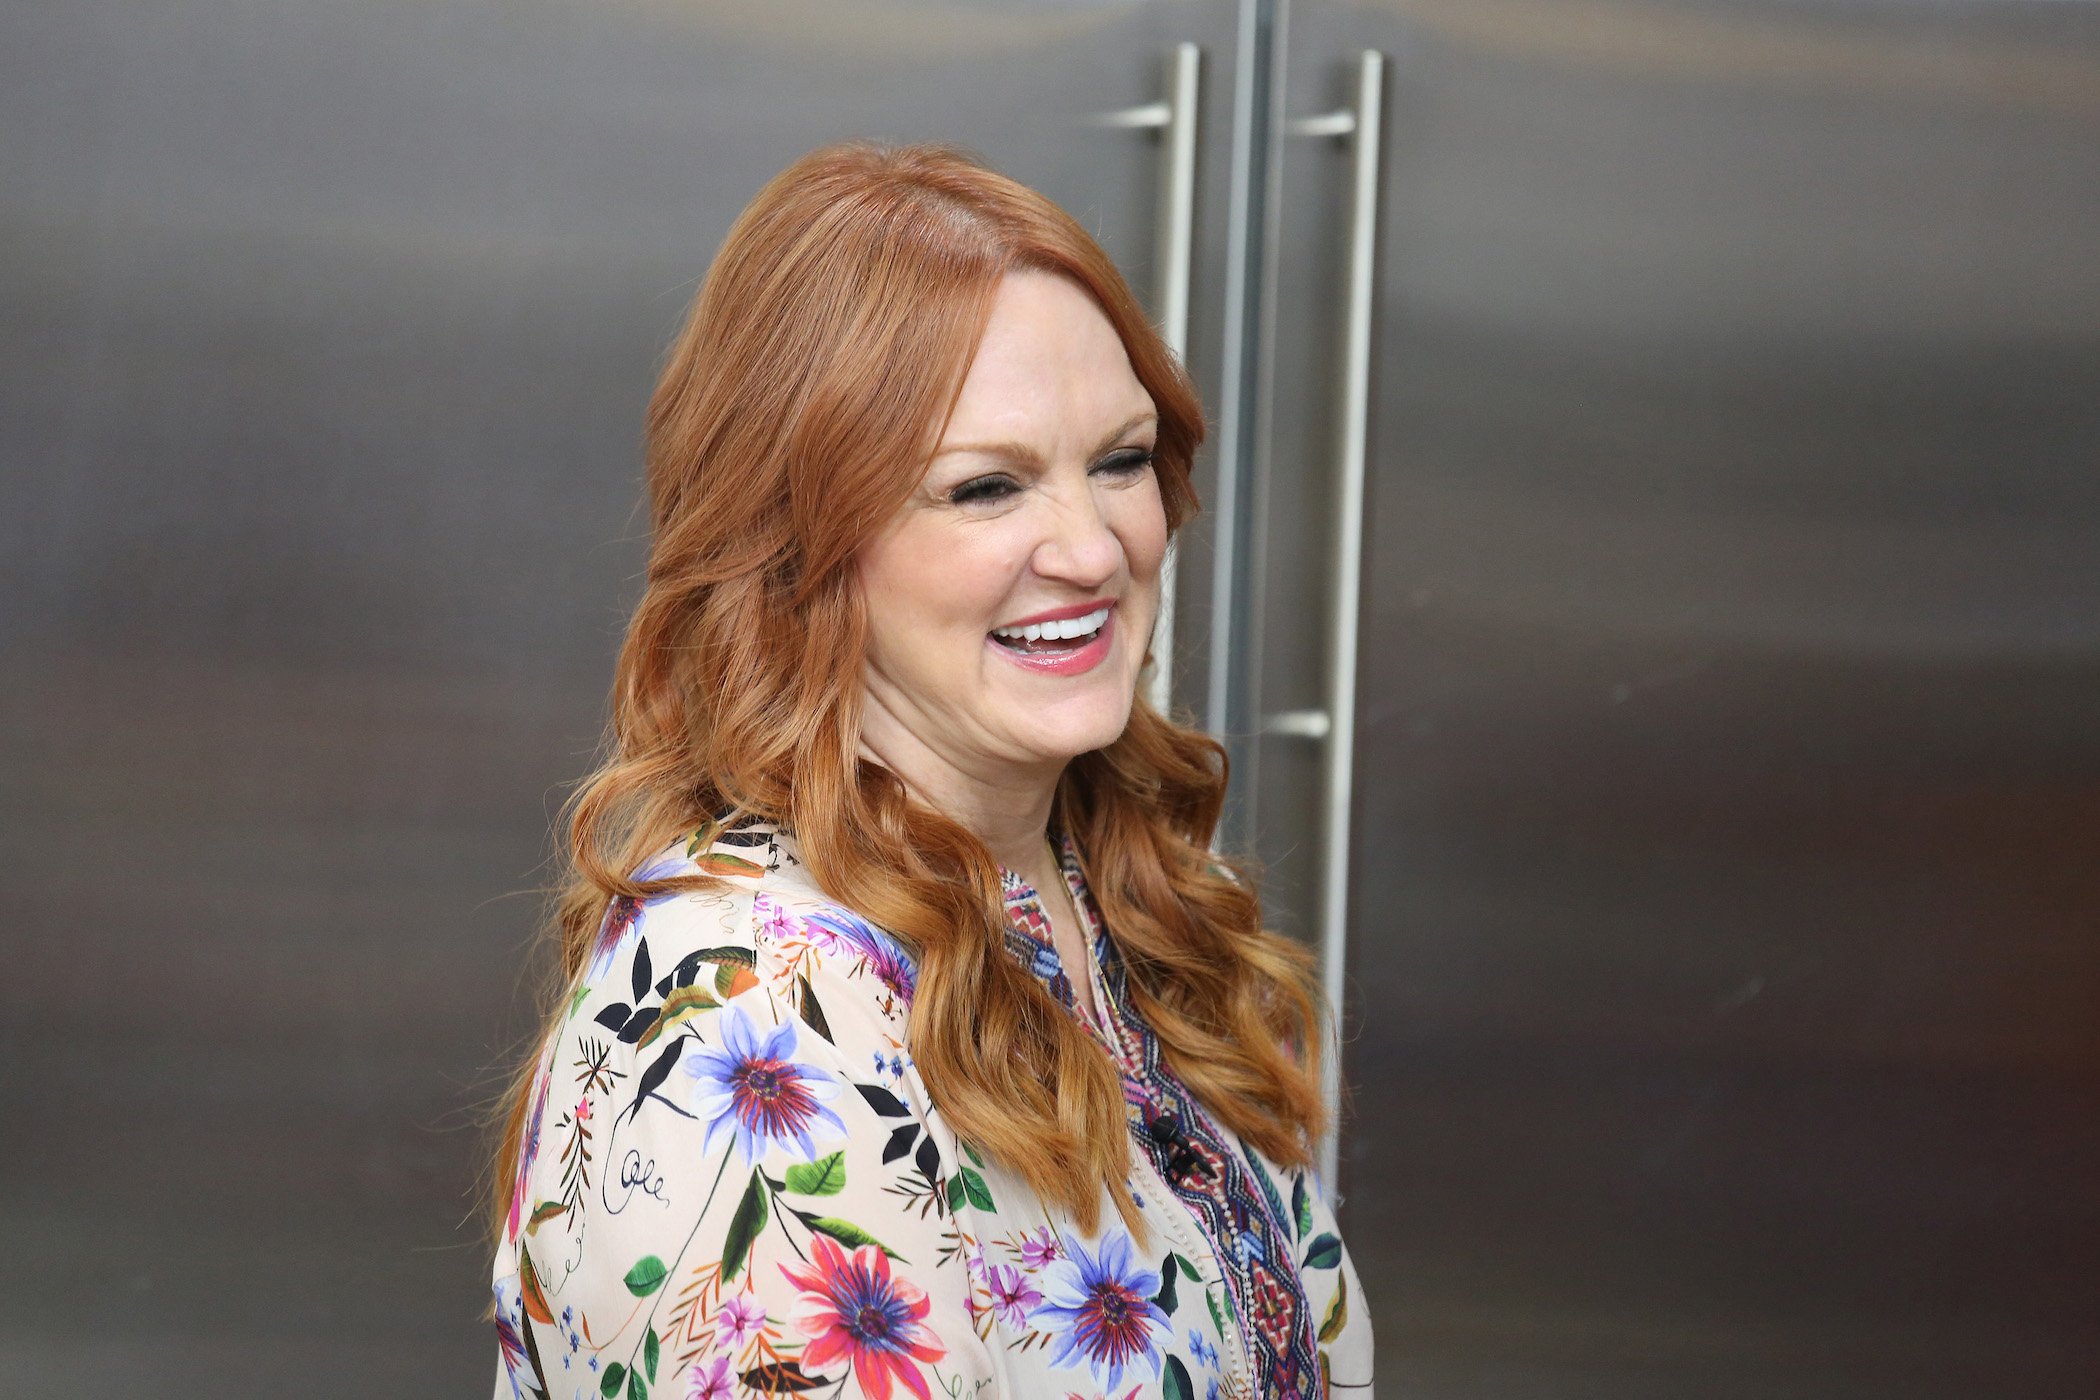 Ree Drummond from 'The Pioneer Woman' smiling while wearing a brightly colored shirt